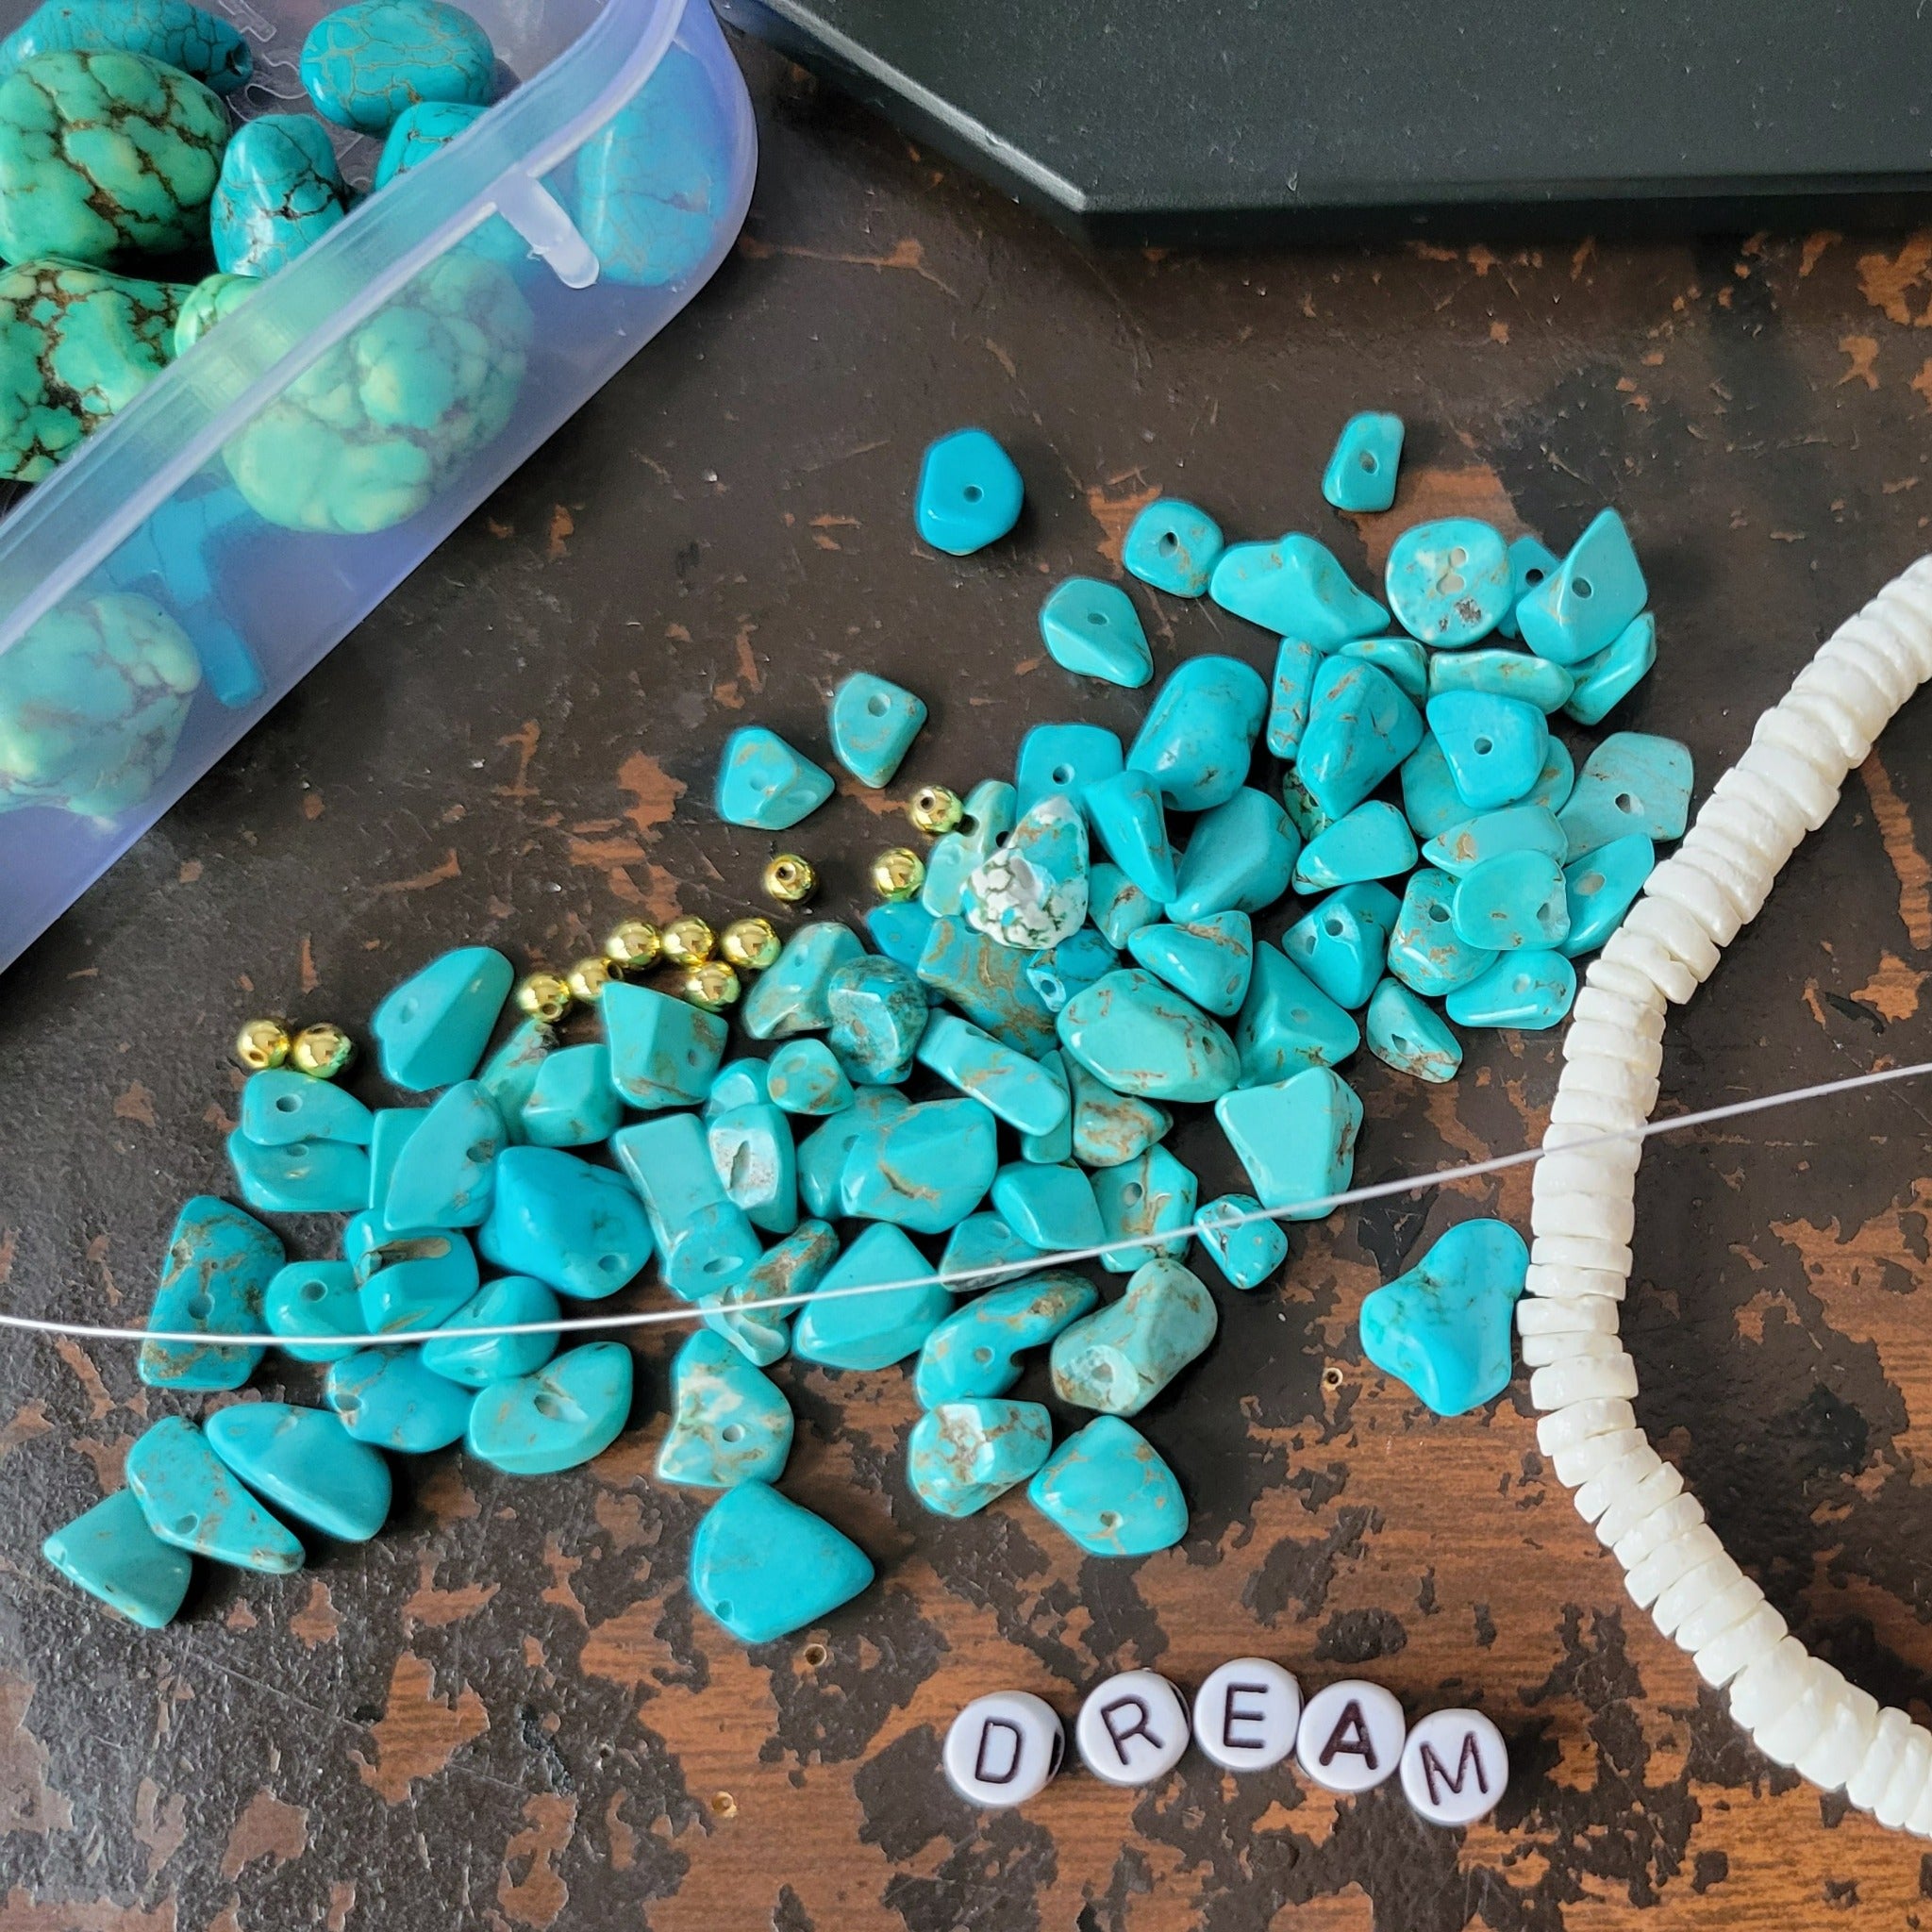 Real Turquoise and 14kt Gold Beaded Necklace, Bracelet, Earrings, or Set